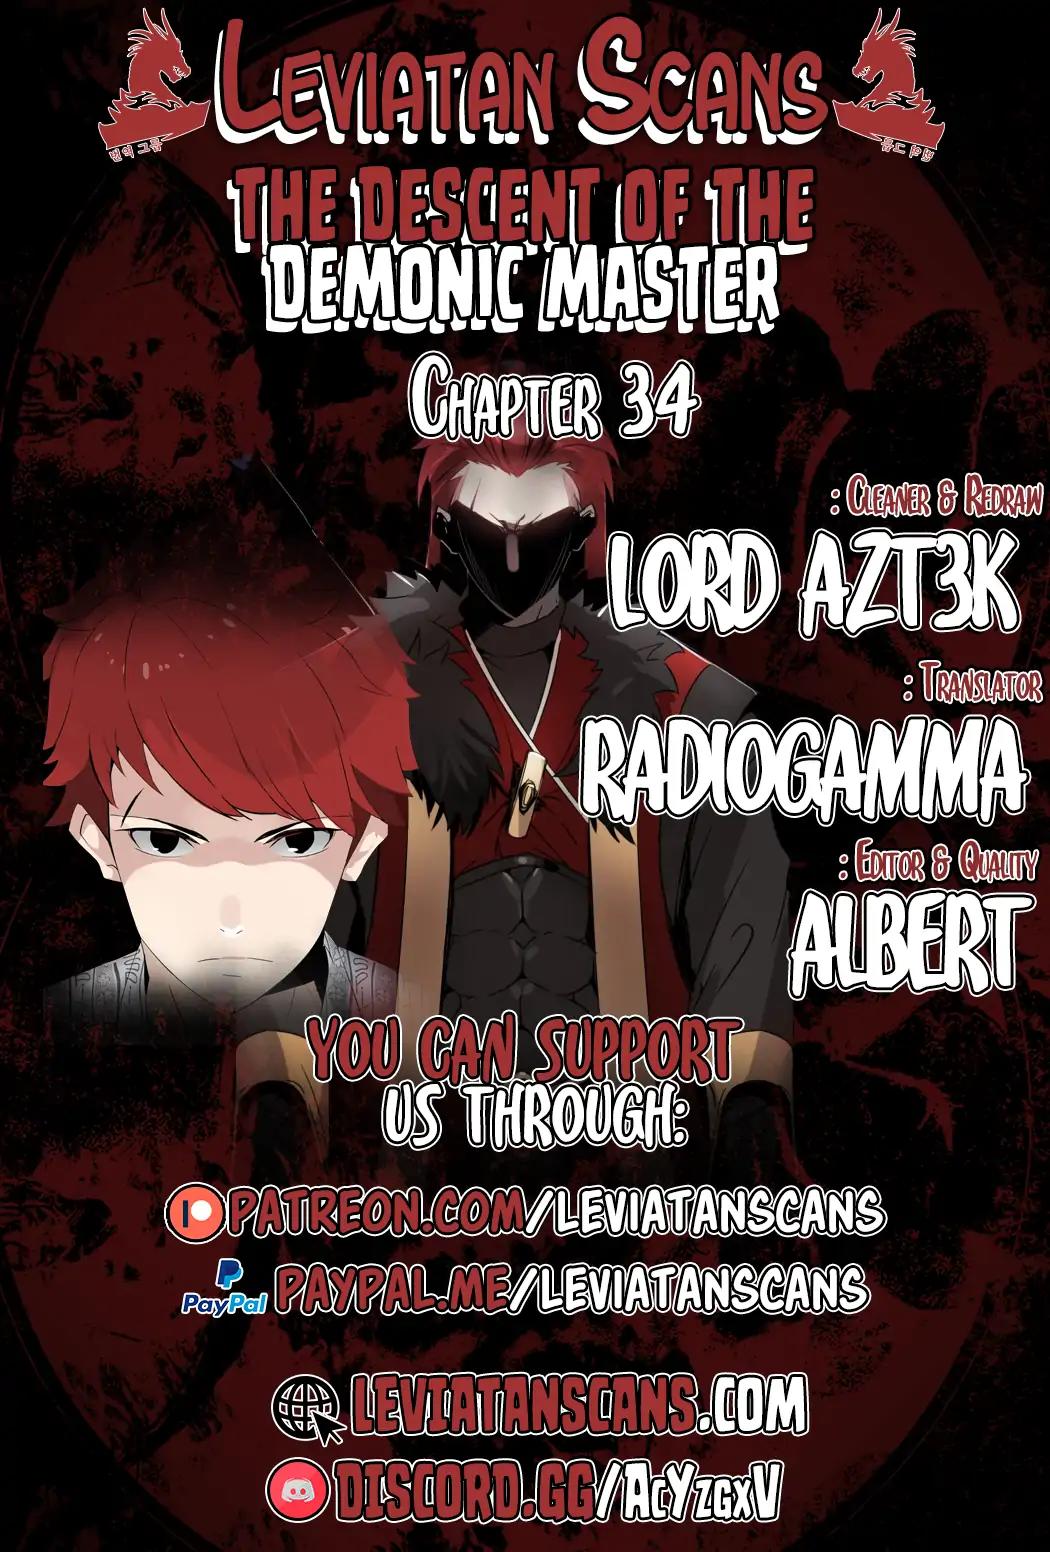 The Descent of the Demonic Master Chapter 34